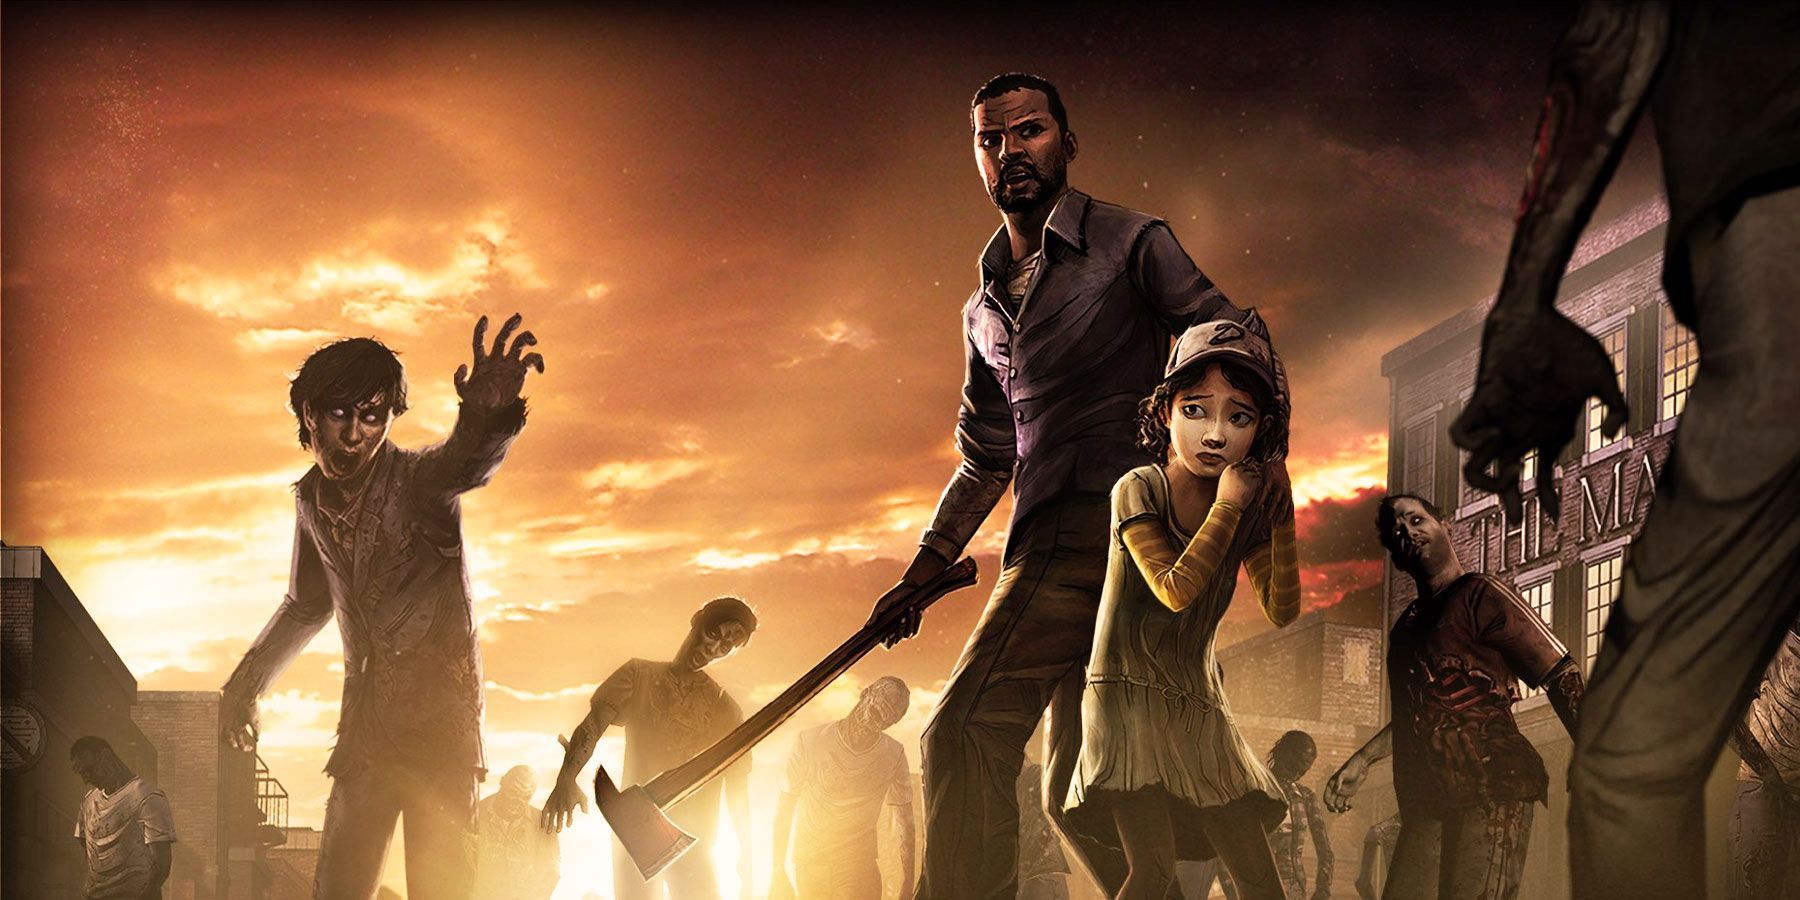 Lee and Clementine amongst a horde of zombies in The Walking Dead